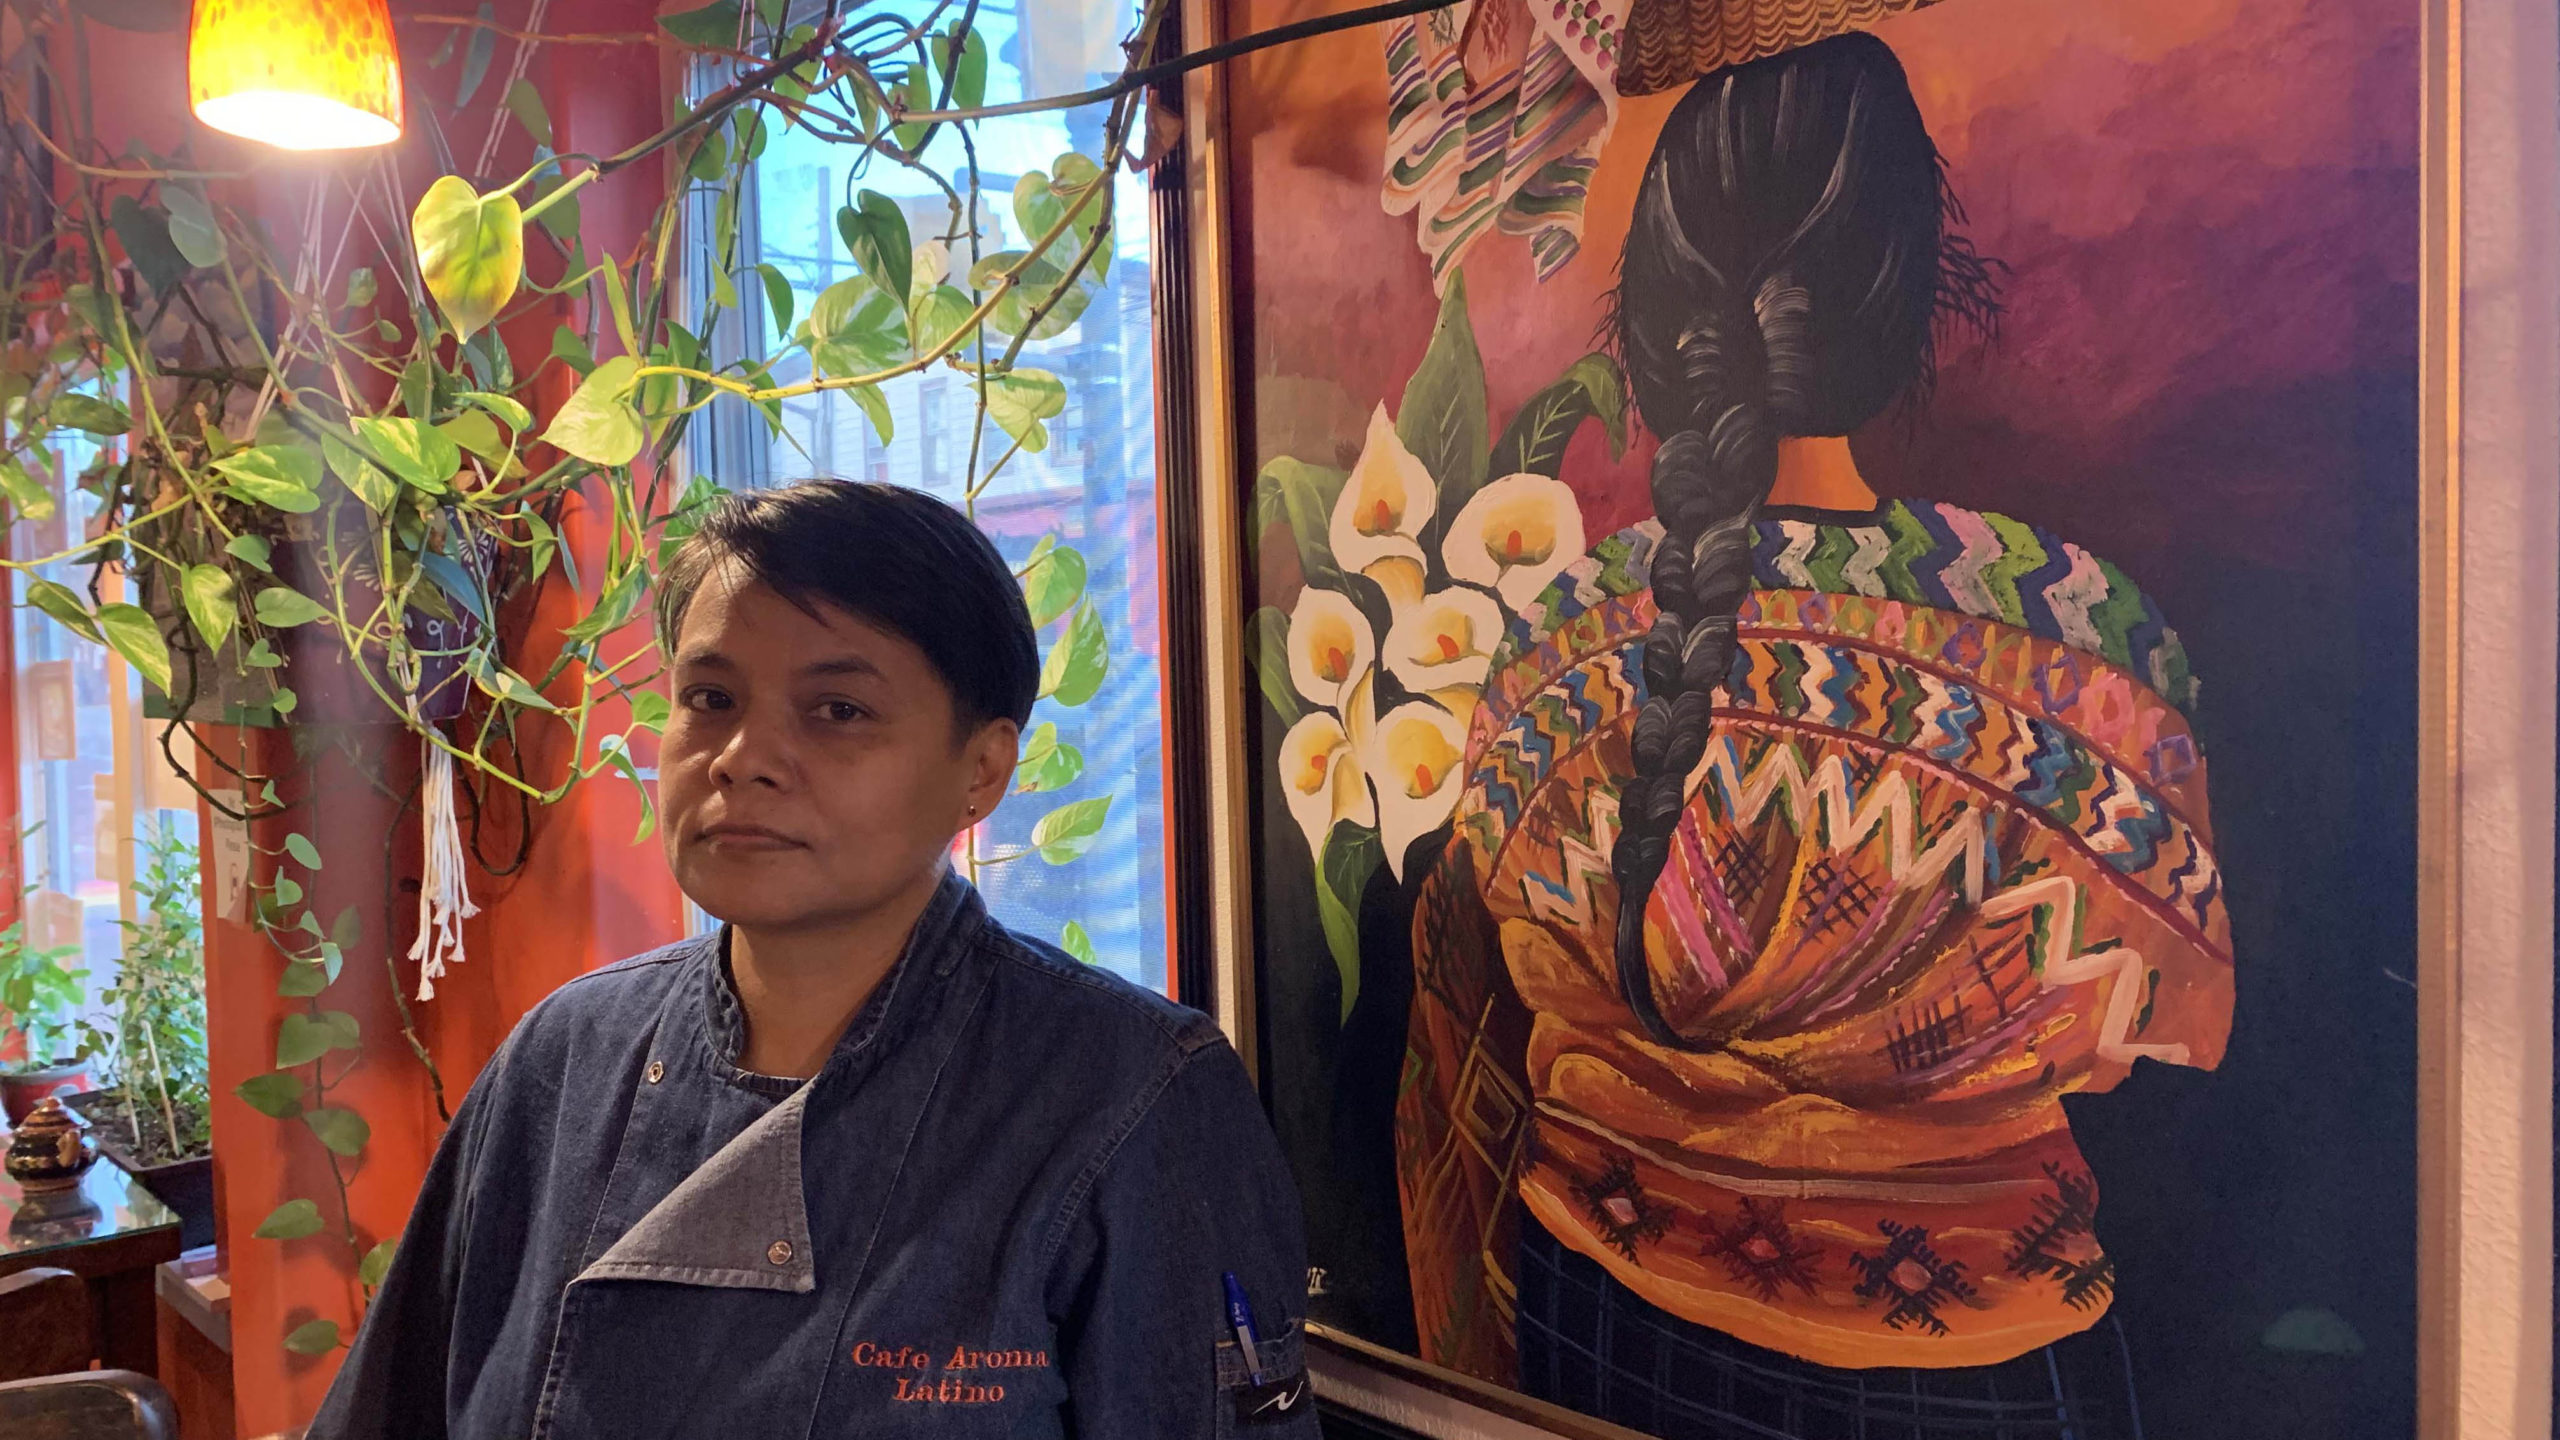 Claudia Pinto described their restaurant Café Aroma Latino, as a place that is "representative of all Latin American cultures."